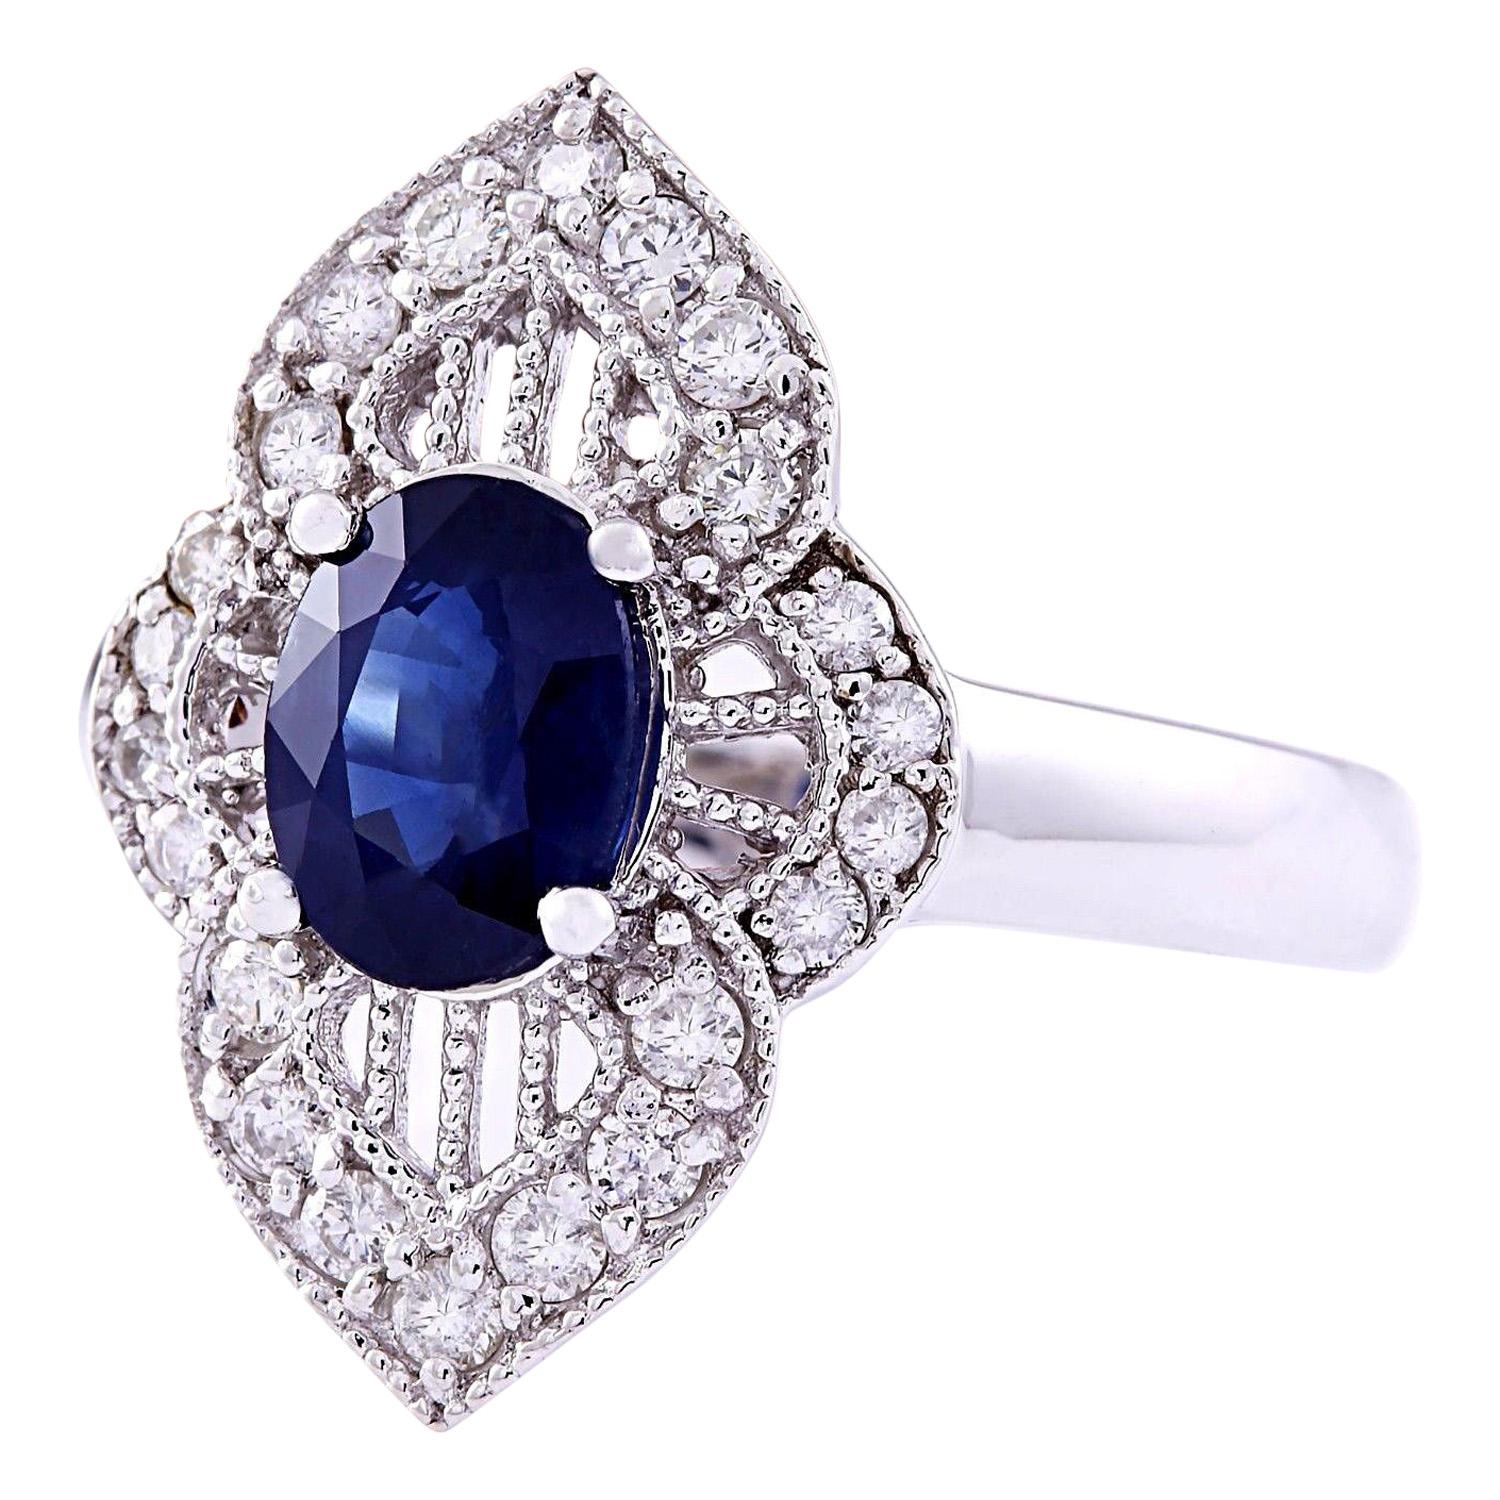 1.85 Carat Natural Sapphire 14K Solid White Gold Diamond Ring
 Item Type: Ring
 Item Style: Cocktail
 Material: 14K White Gold
 Mainstone: Sapphire
 Stone Color: Blue
 Stone Weight: 1.45 Carat
 Stone Shape: Oval
 Stone Quantity: 1
 Stone Dimensions: